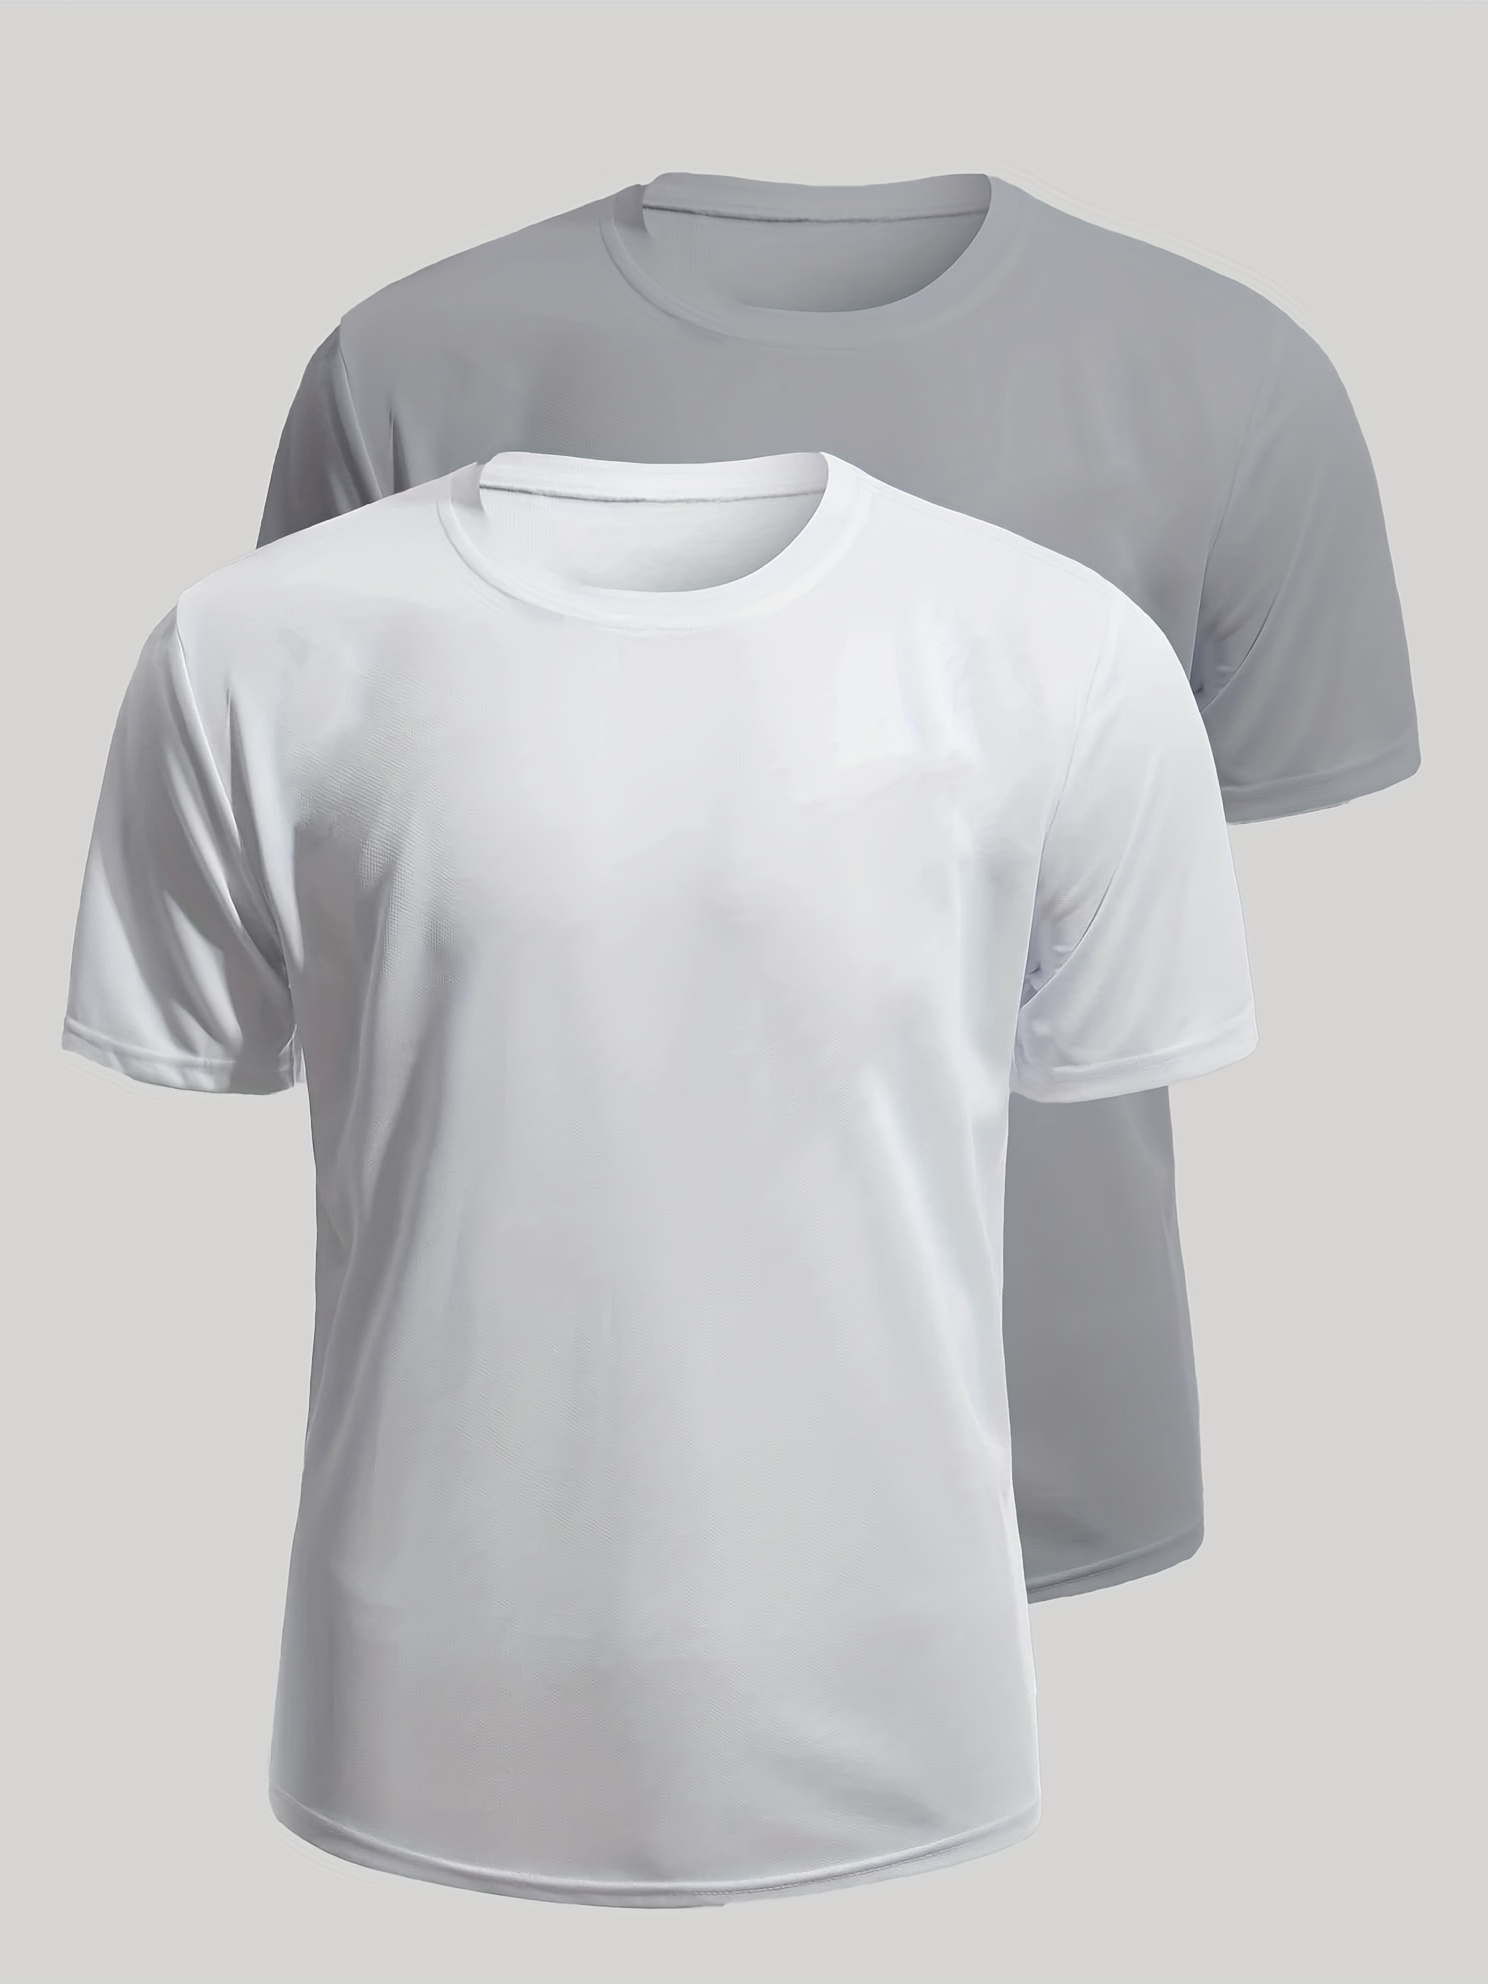 Plus Size Men's Sports Casual Fitness Running T shirts Quick